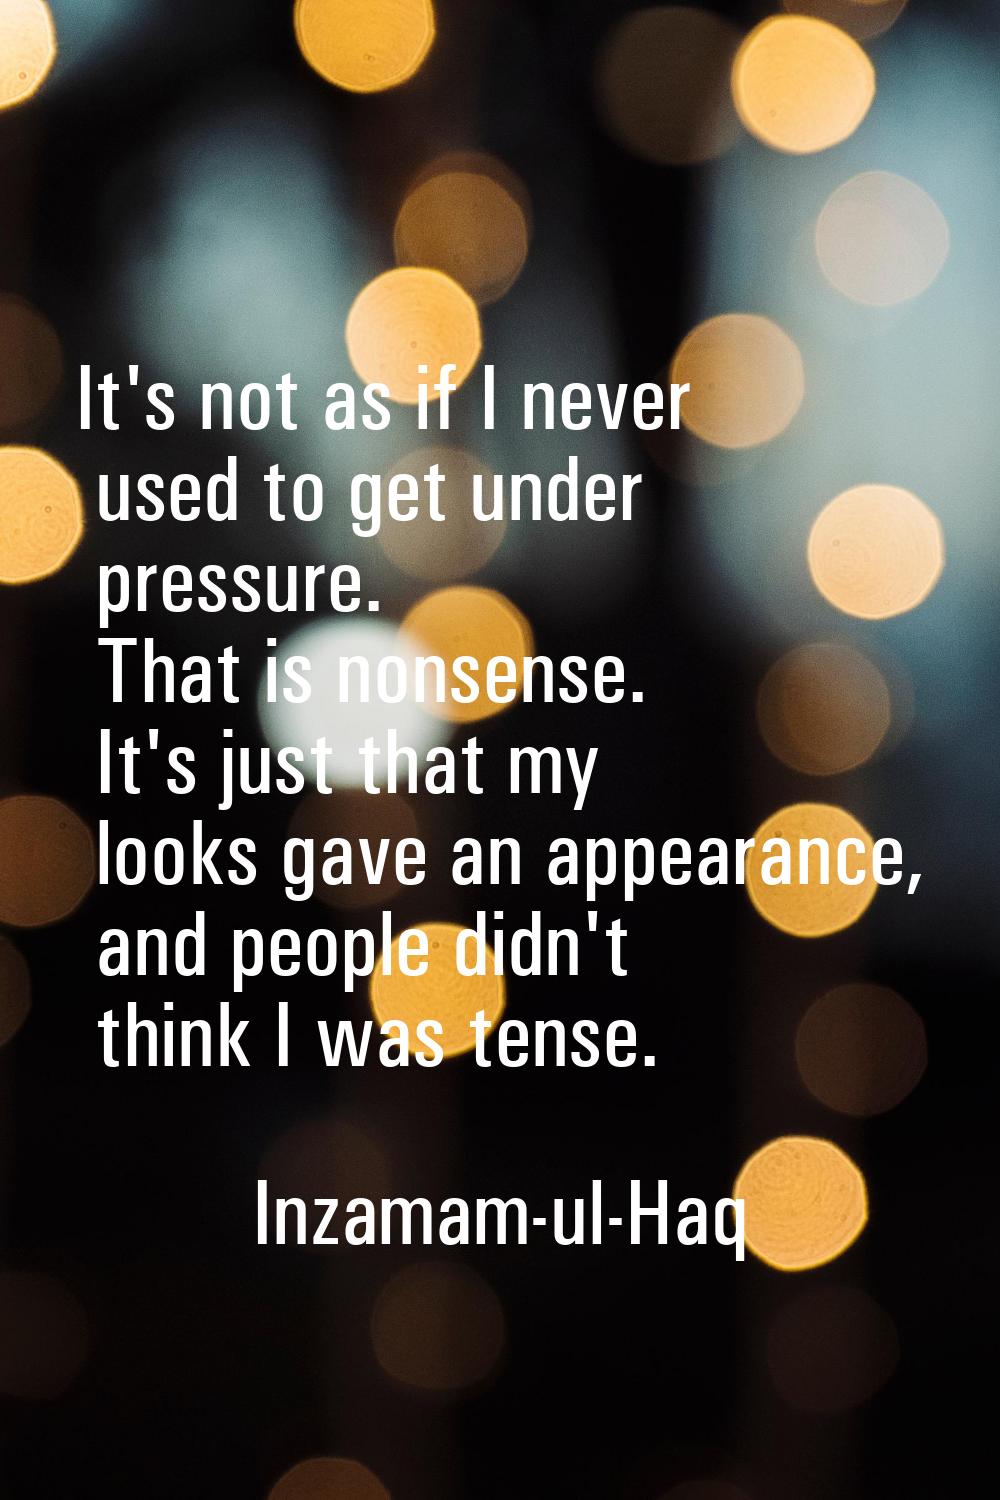 It's not as if I never used to get under pressure. That is nonsense. It's just that my looks gave a